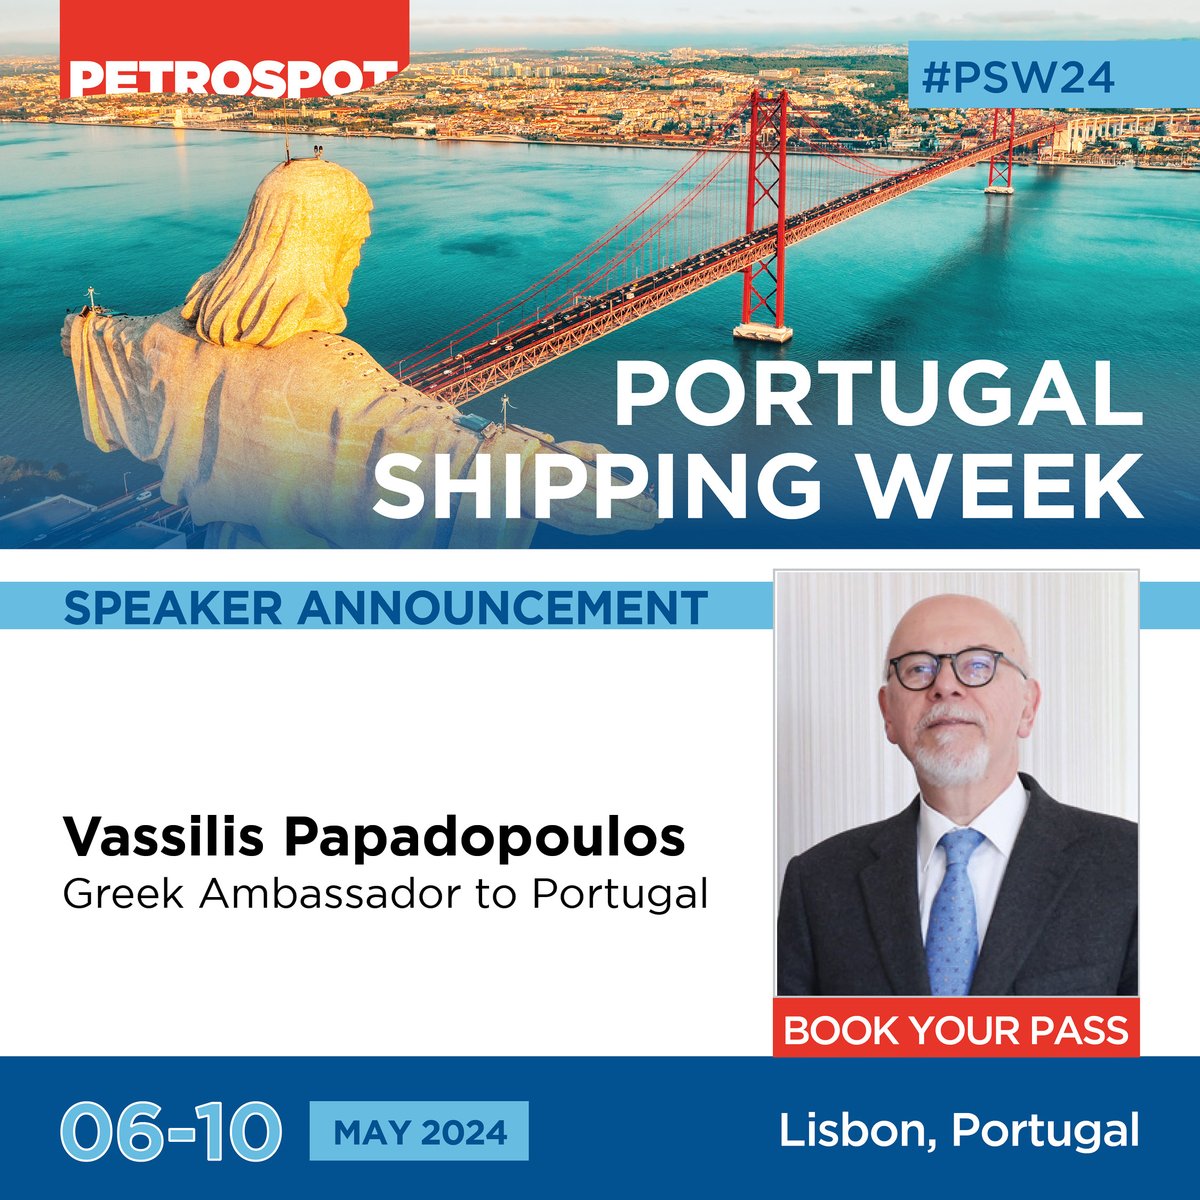 Vassilis Papadopoulos, Greek Ambassador to Portugal will be speaking at Portugal Shipping Week taking place in Lisbon 6-10 May 2024. • View the programme here ➔ lnkd.in/emKKW94M • Register to attend here ➔ lnkd.in/ezfMeS_Z #PSW24 #SES24 #Portugal #Lisboa